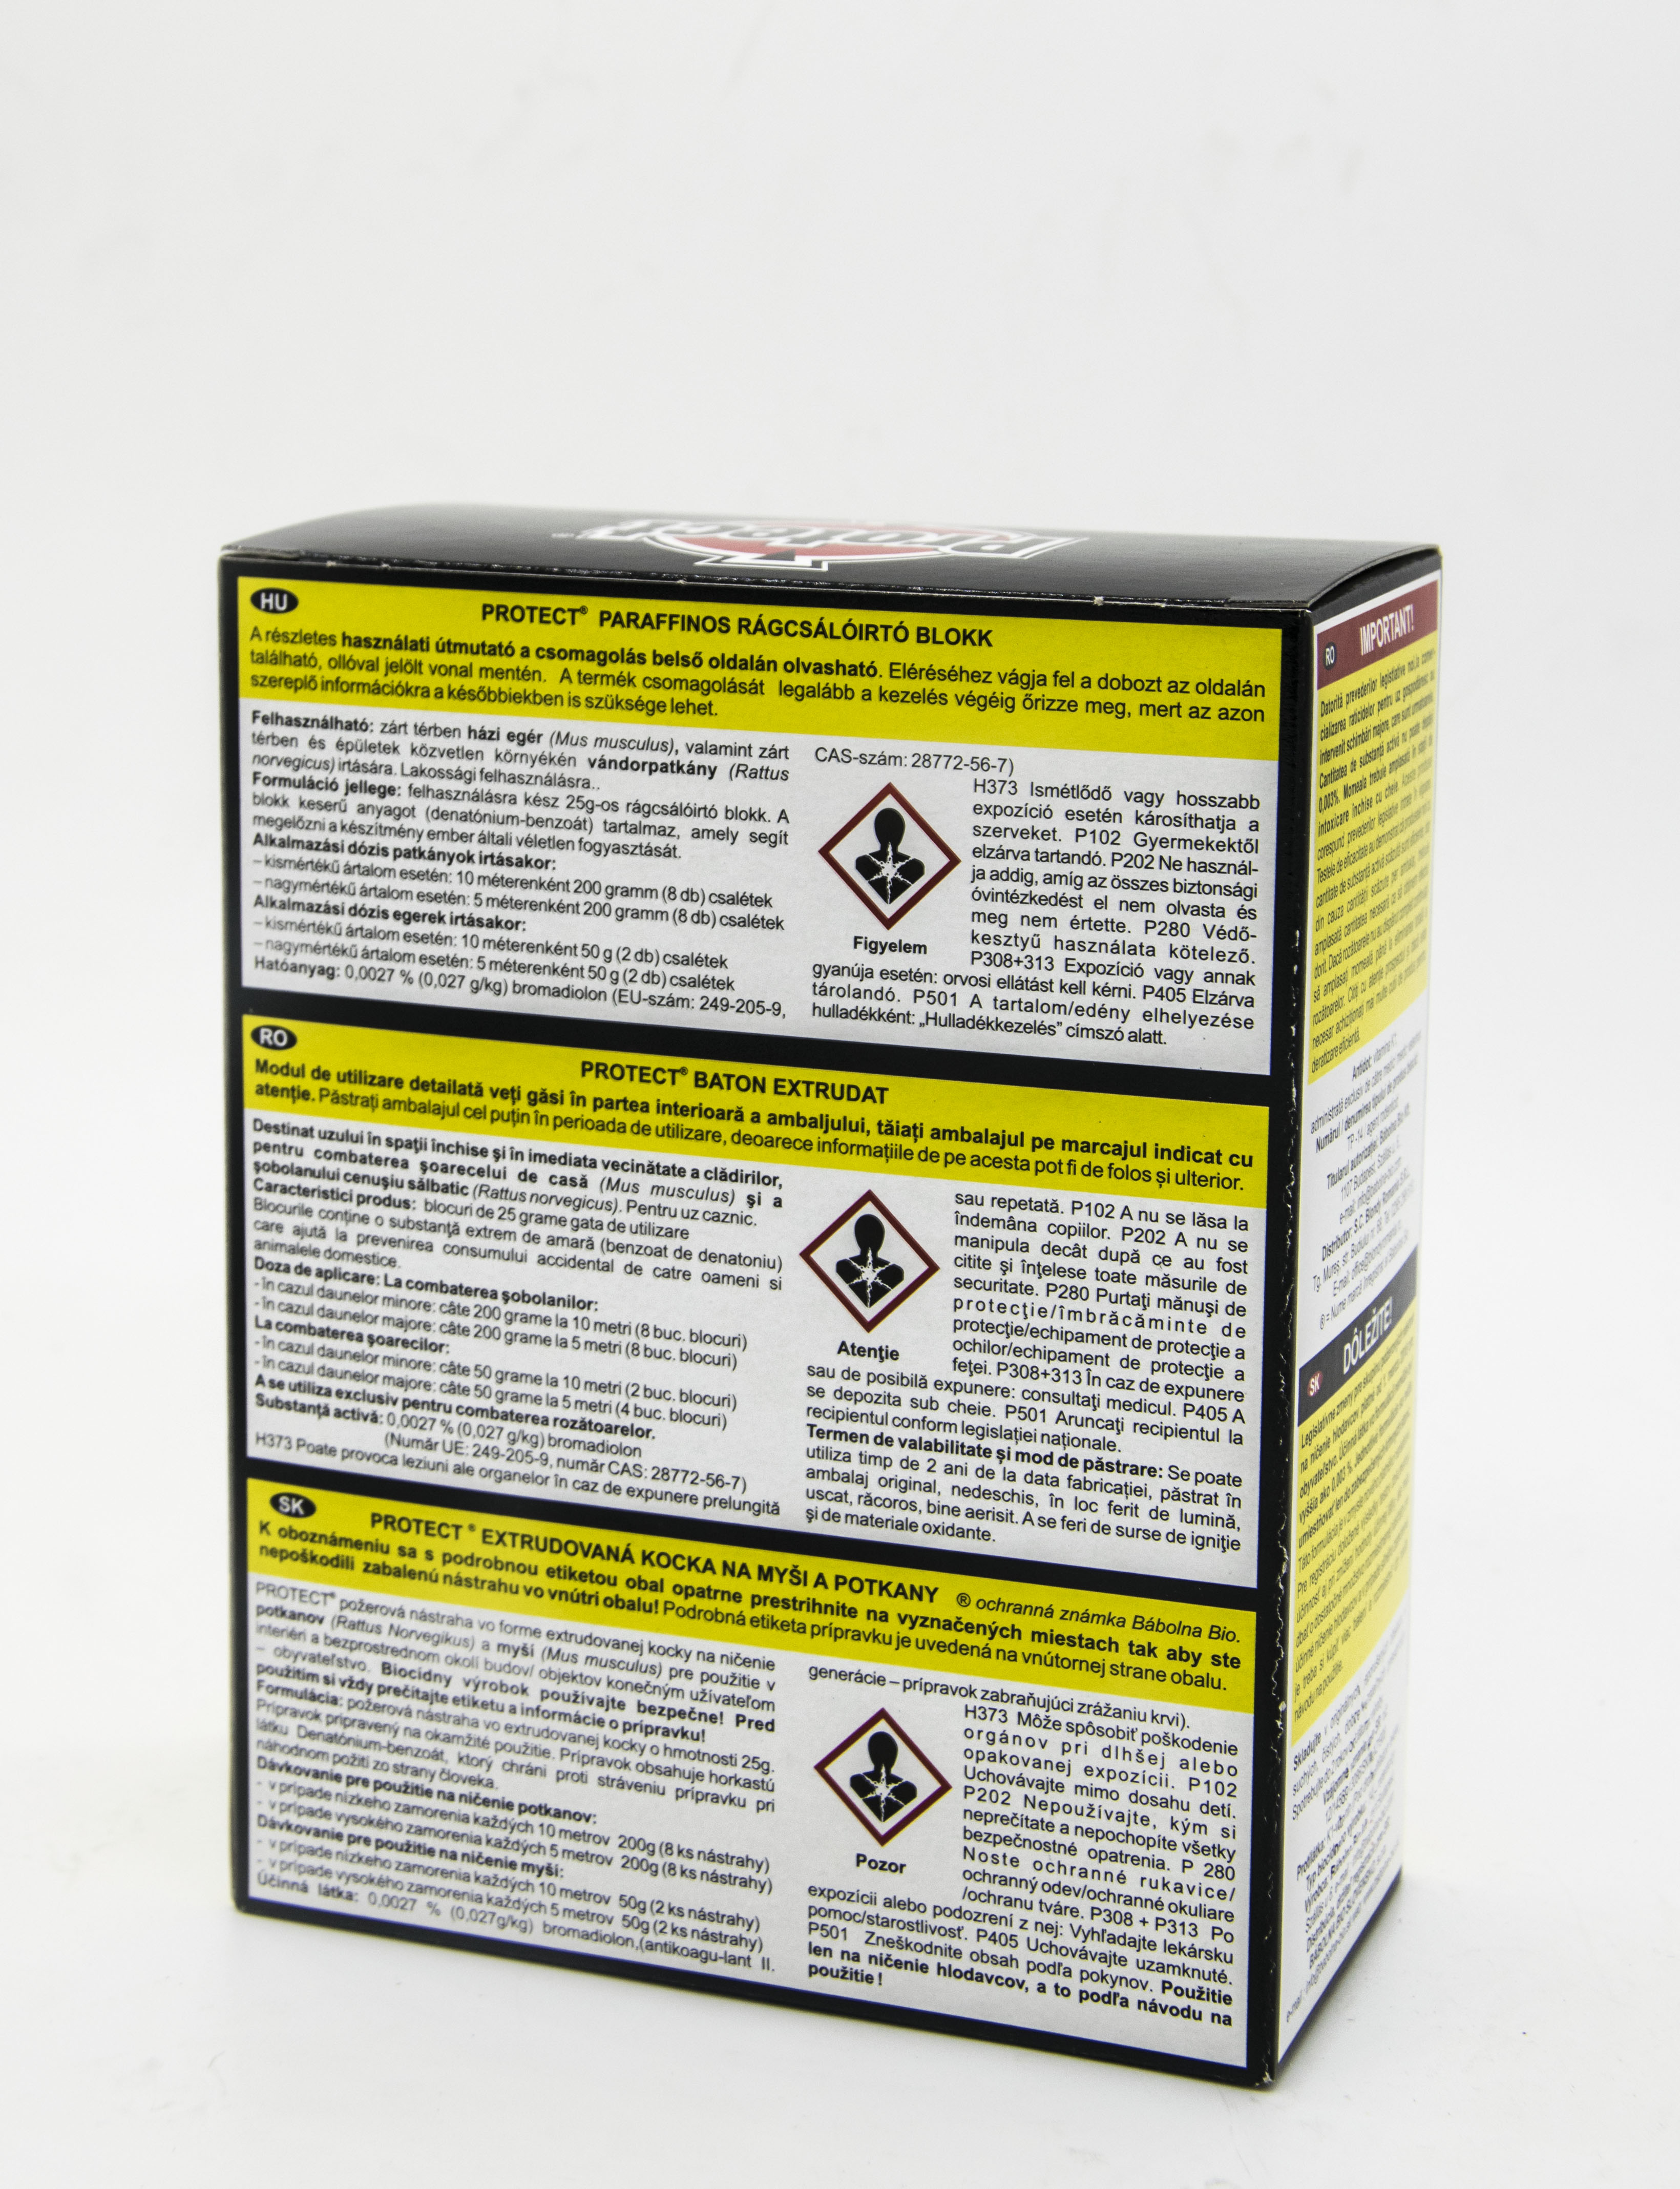 Protect paraffin rodenticide block 12x25 g